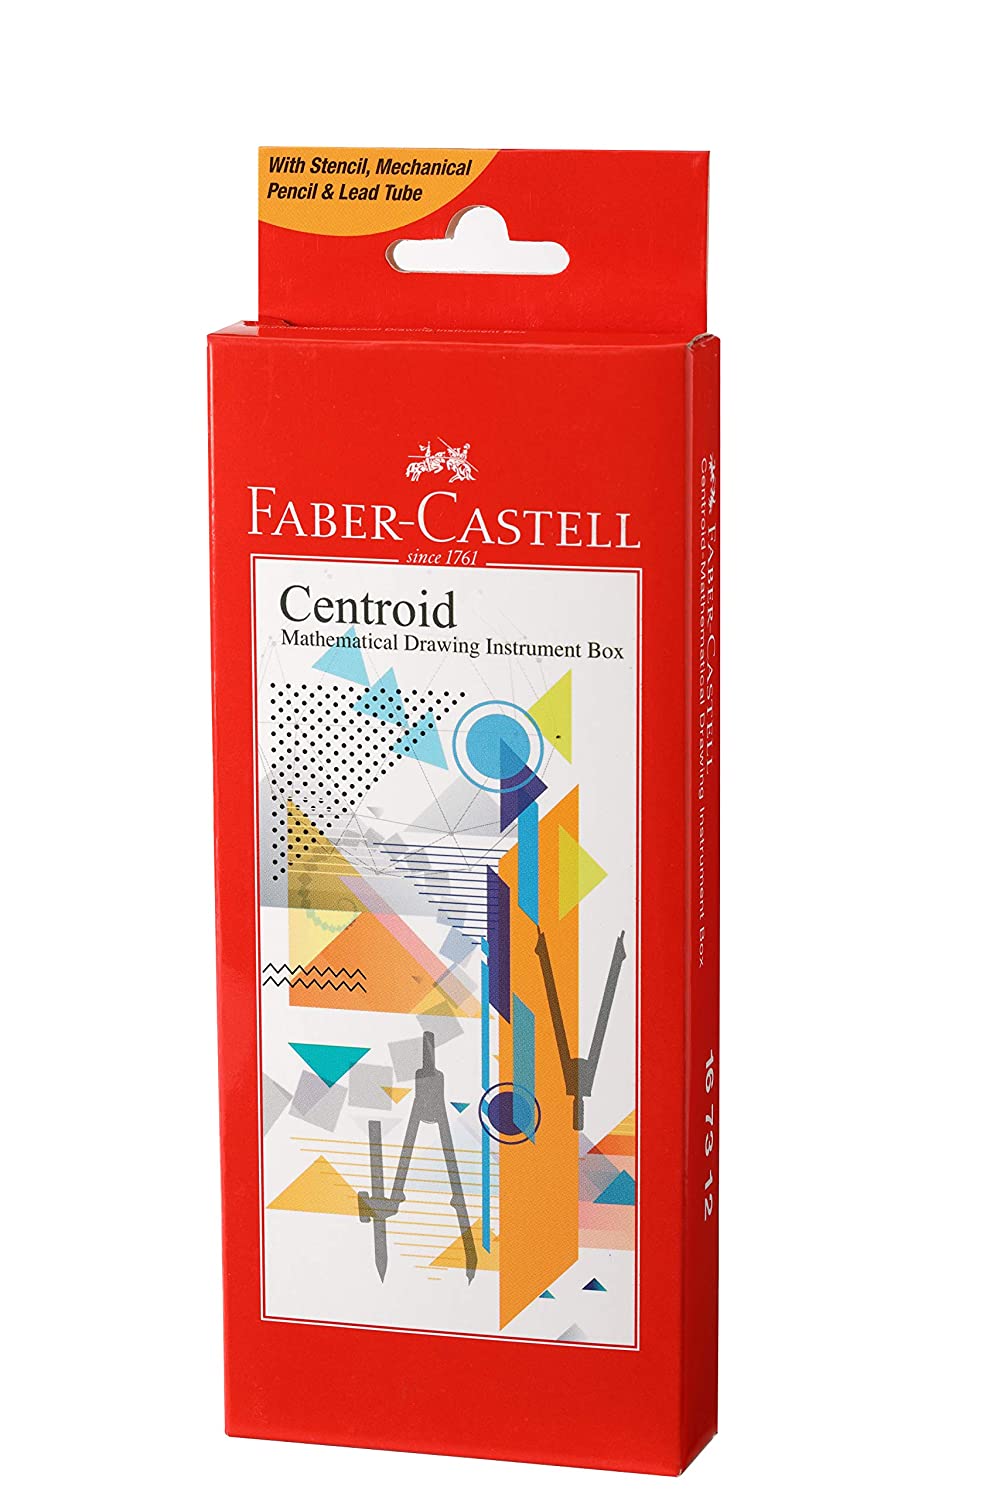 Faber Castell Centroid Mathematical Drawing Geometry Box Pack of 50